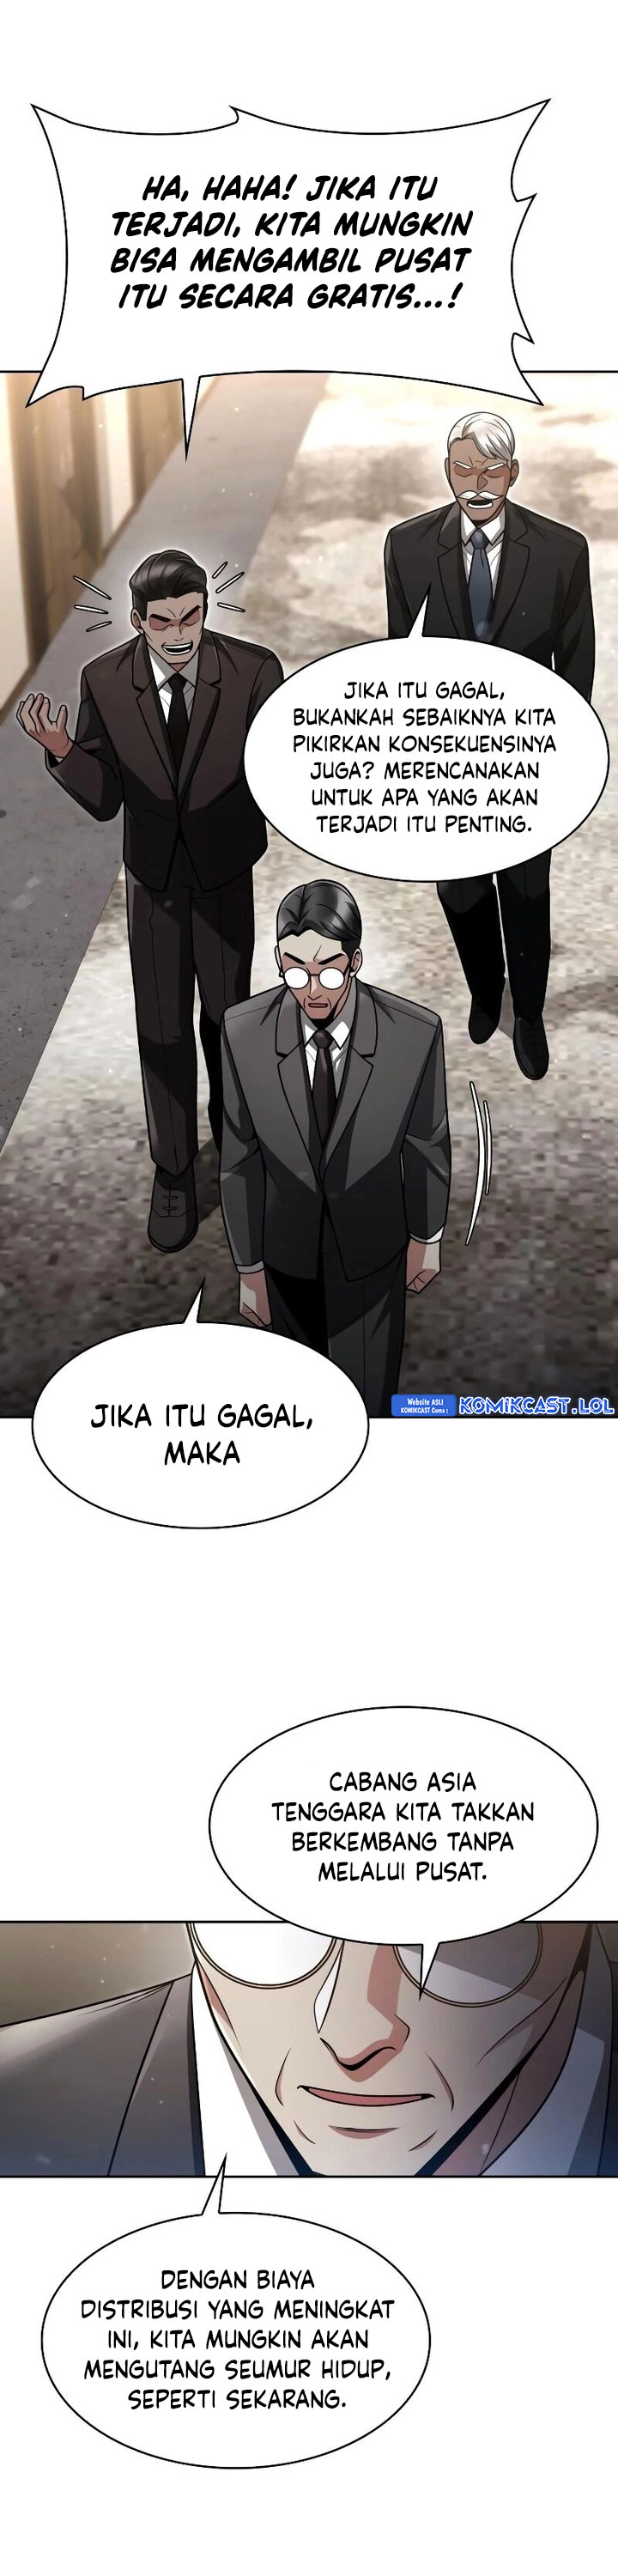 Dilarang COPAS - situs resmi www.mangacanblog.com - Komik clever cleaning life of the returned genius hunter 065 - chapter 65 66 Indonesia clever cleaning life of the returned genius hunter 065 - chapter 65 Terbaru 4|Baca Manga Komik Indonesia|Mangacan